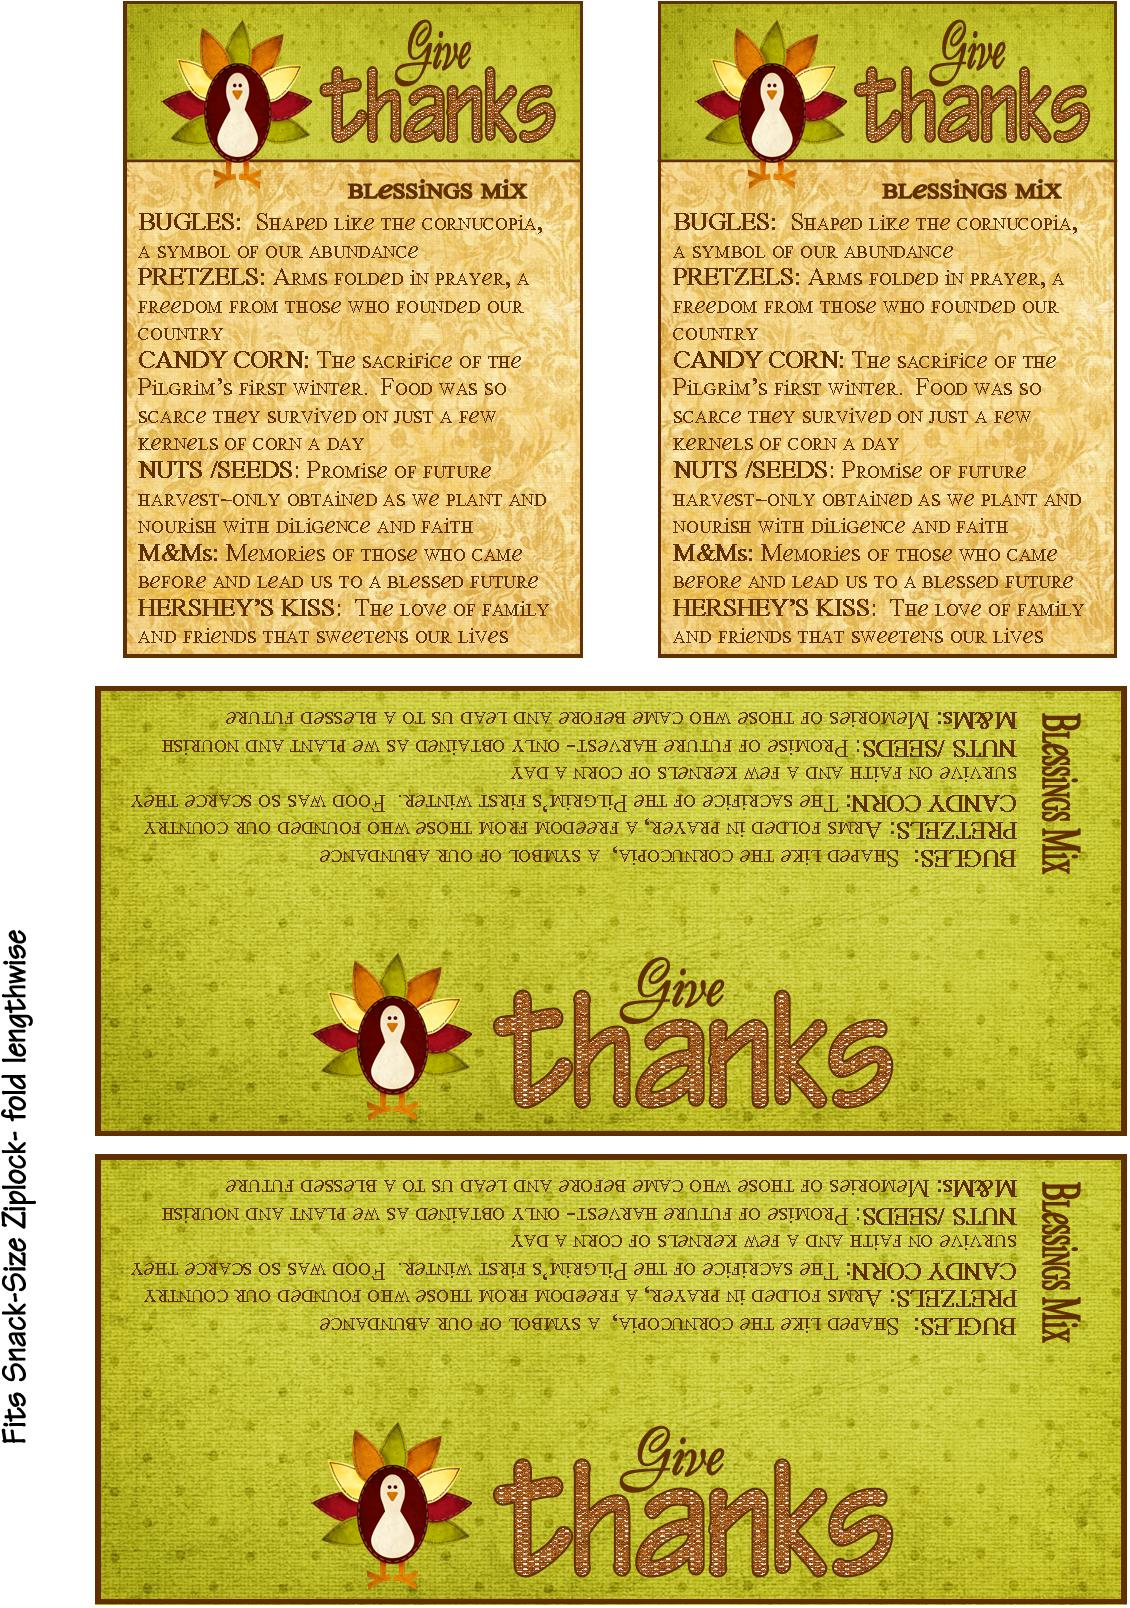 caramel-potatoes-thanksgiving-blessings-mix-and-printable-gift-tag